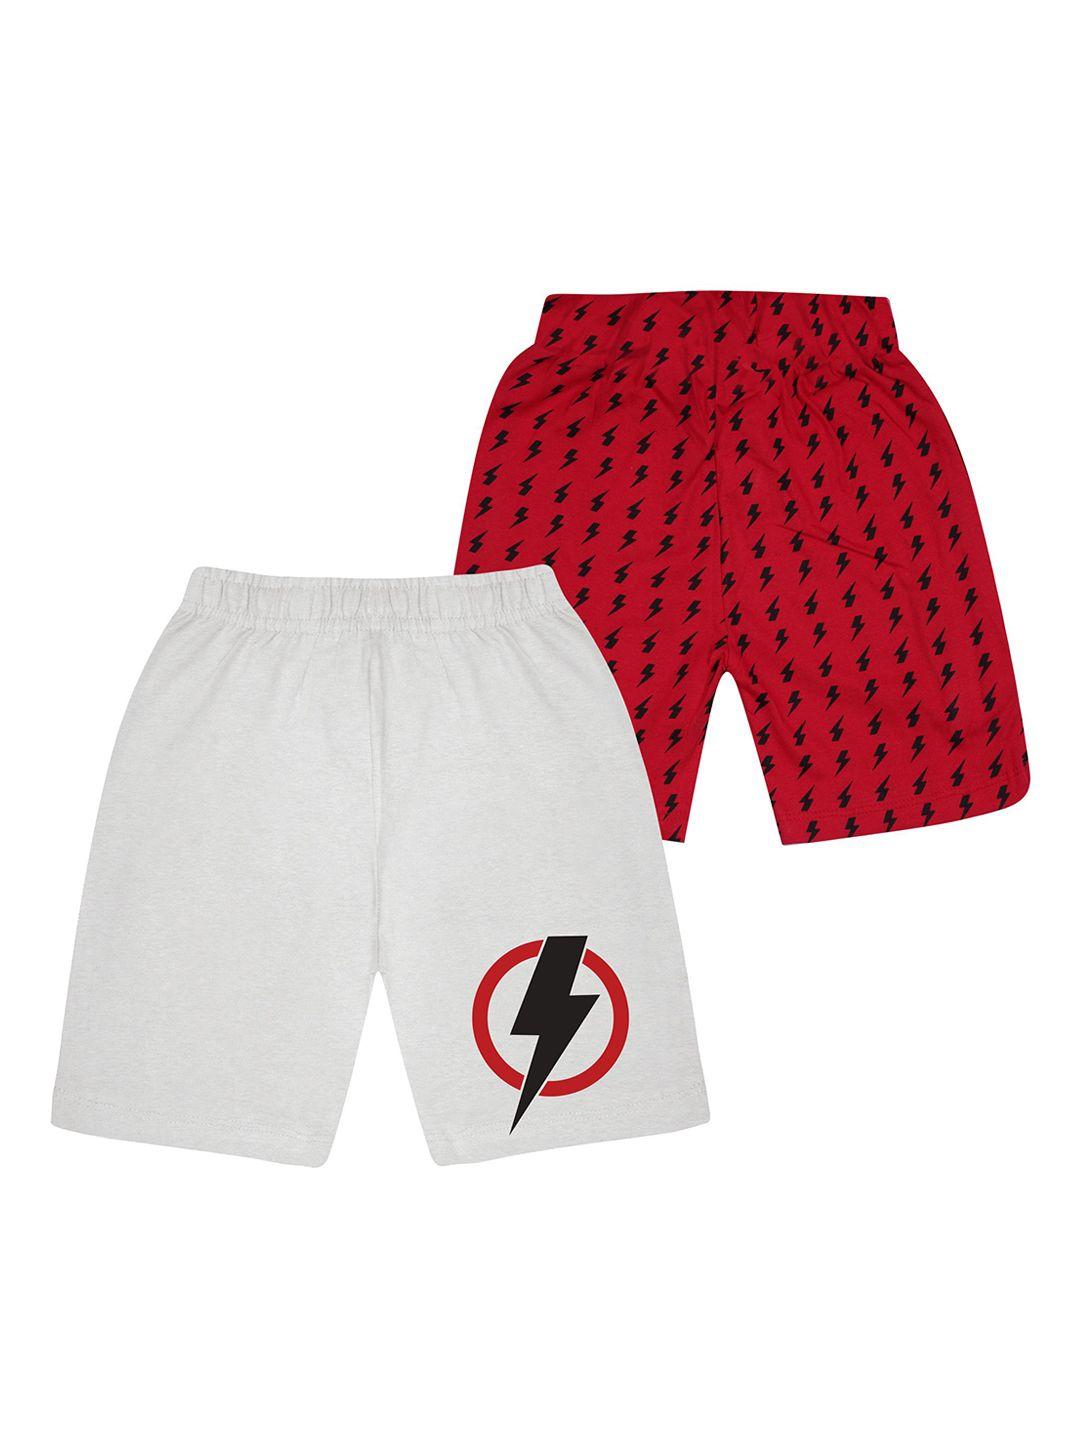 kyda kids boys pack of 2 red & white conversational printed cotton shorts